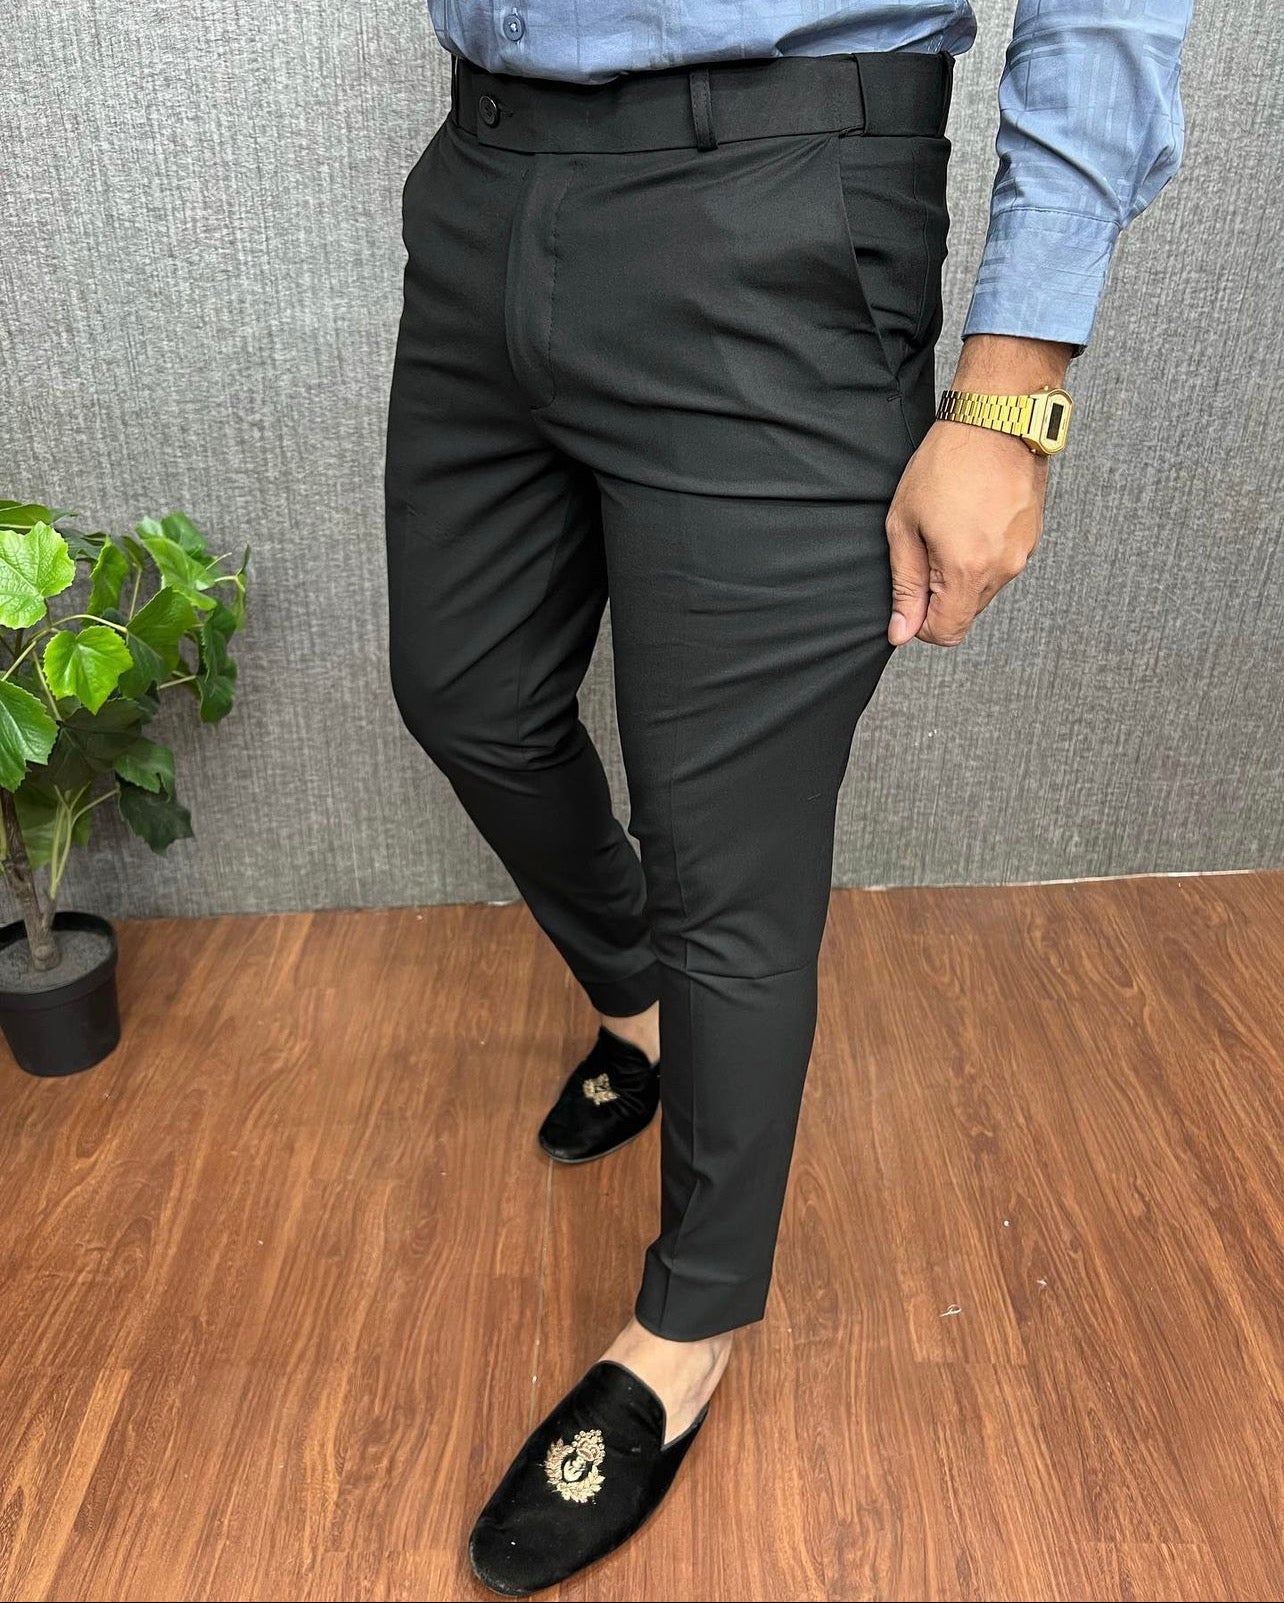 Ankle Length Trousers By Qarot Men | Casual shirts for men, Mens outfits,  Mens casual outfits summer